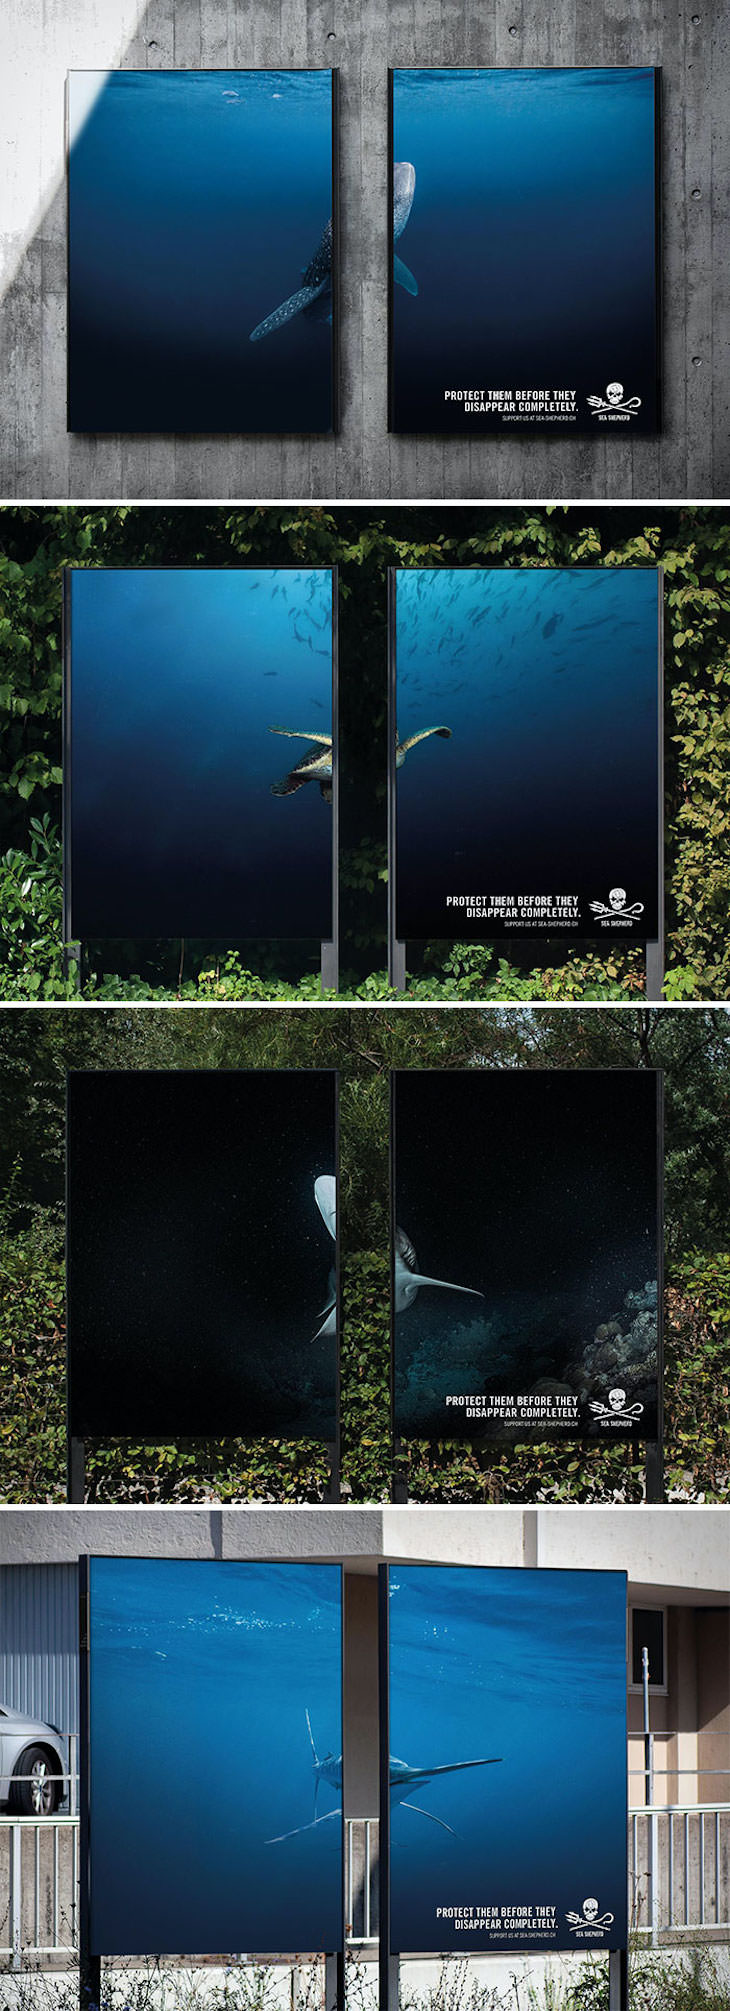  Brilliantly Creative Billboards, A billboard for the Sea Shepherd Conservation Society